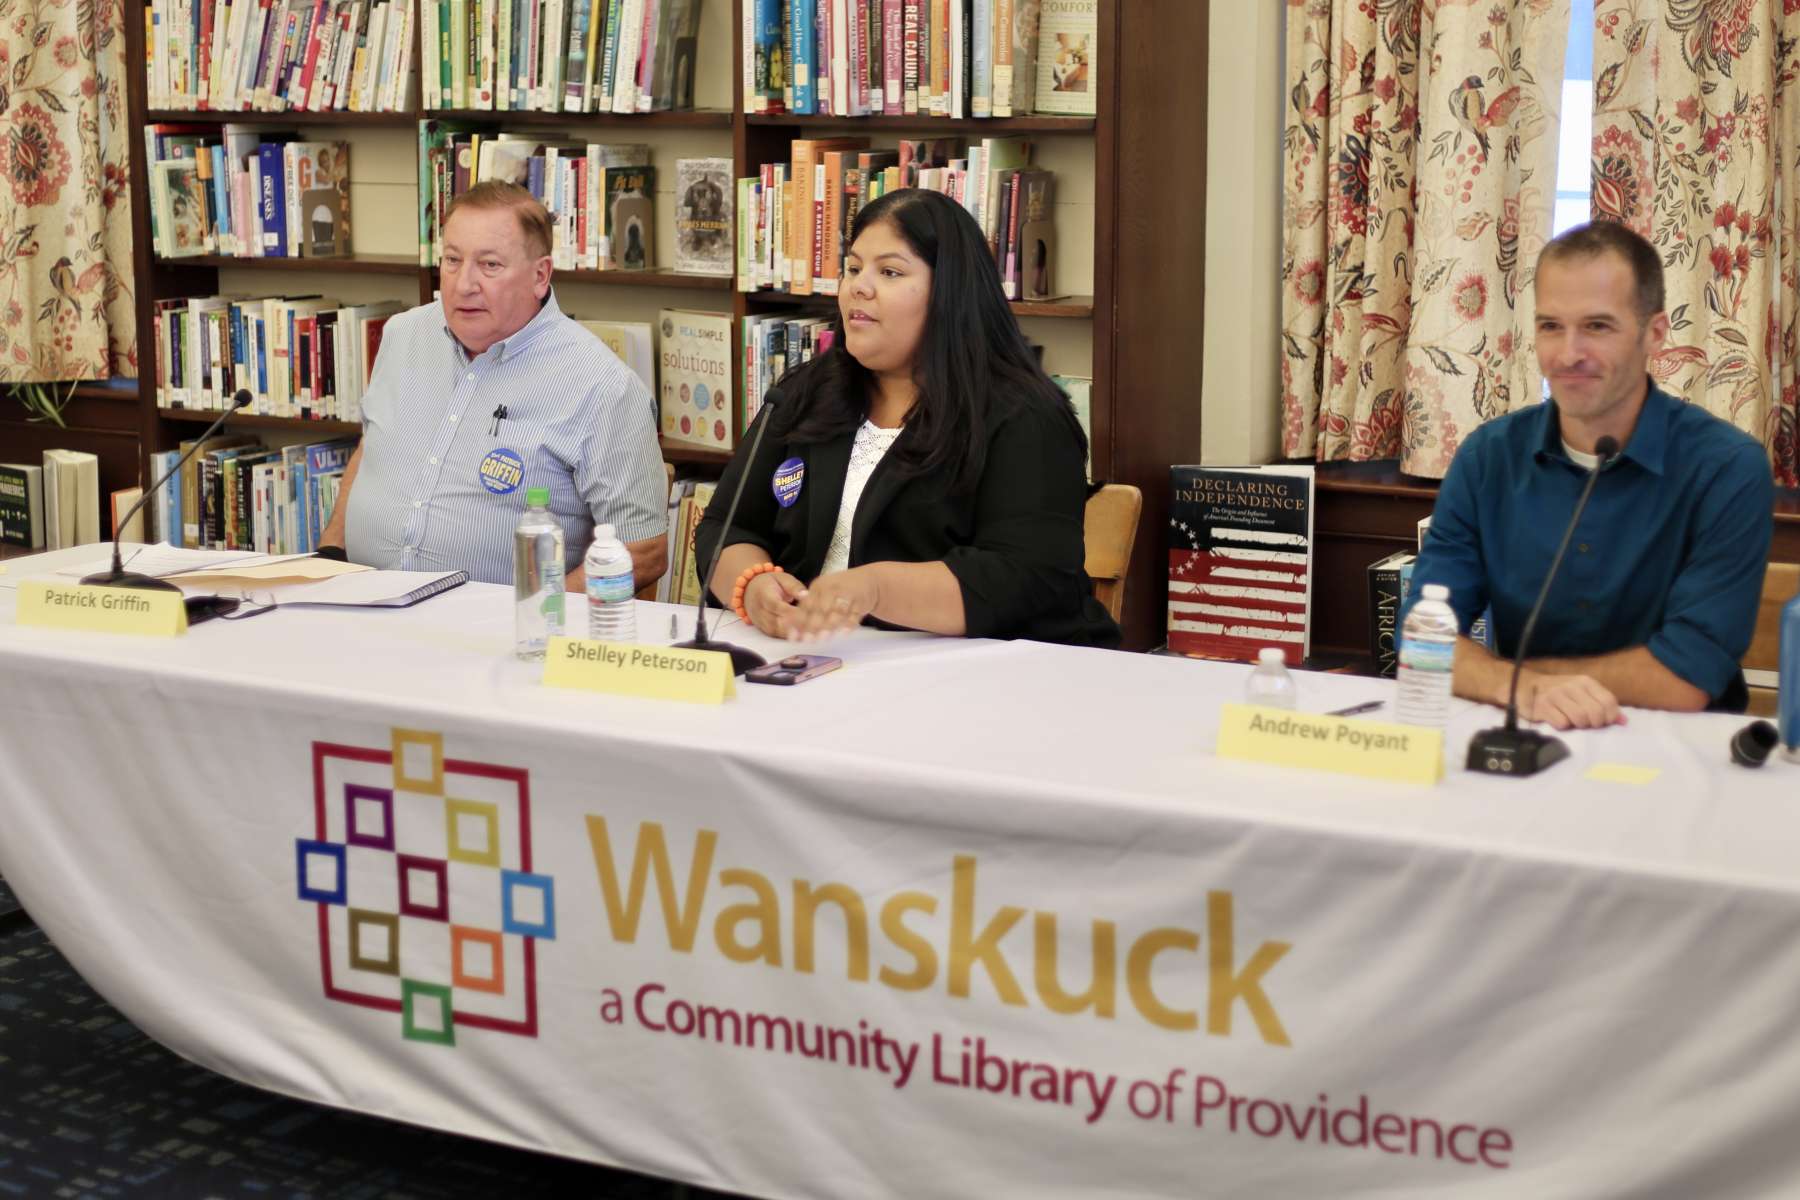 Ward 14 City Council debate showcases sharp differences between candidates